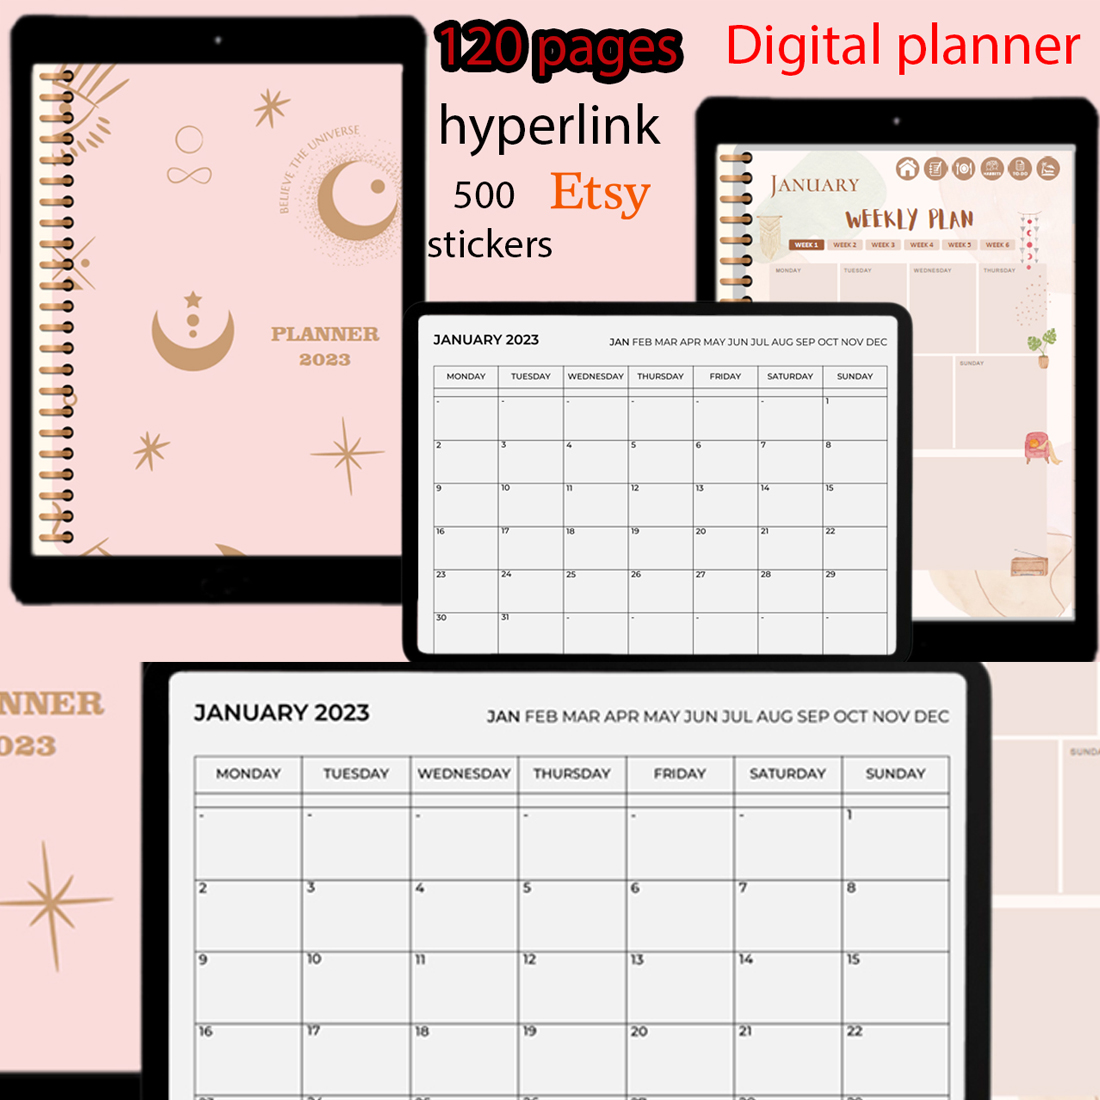 undated digital planner for ipad and android cover image.